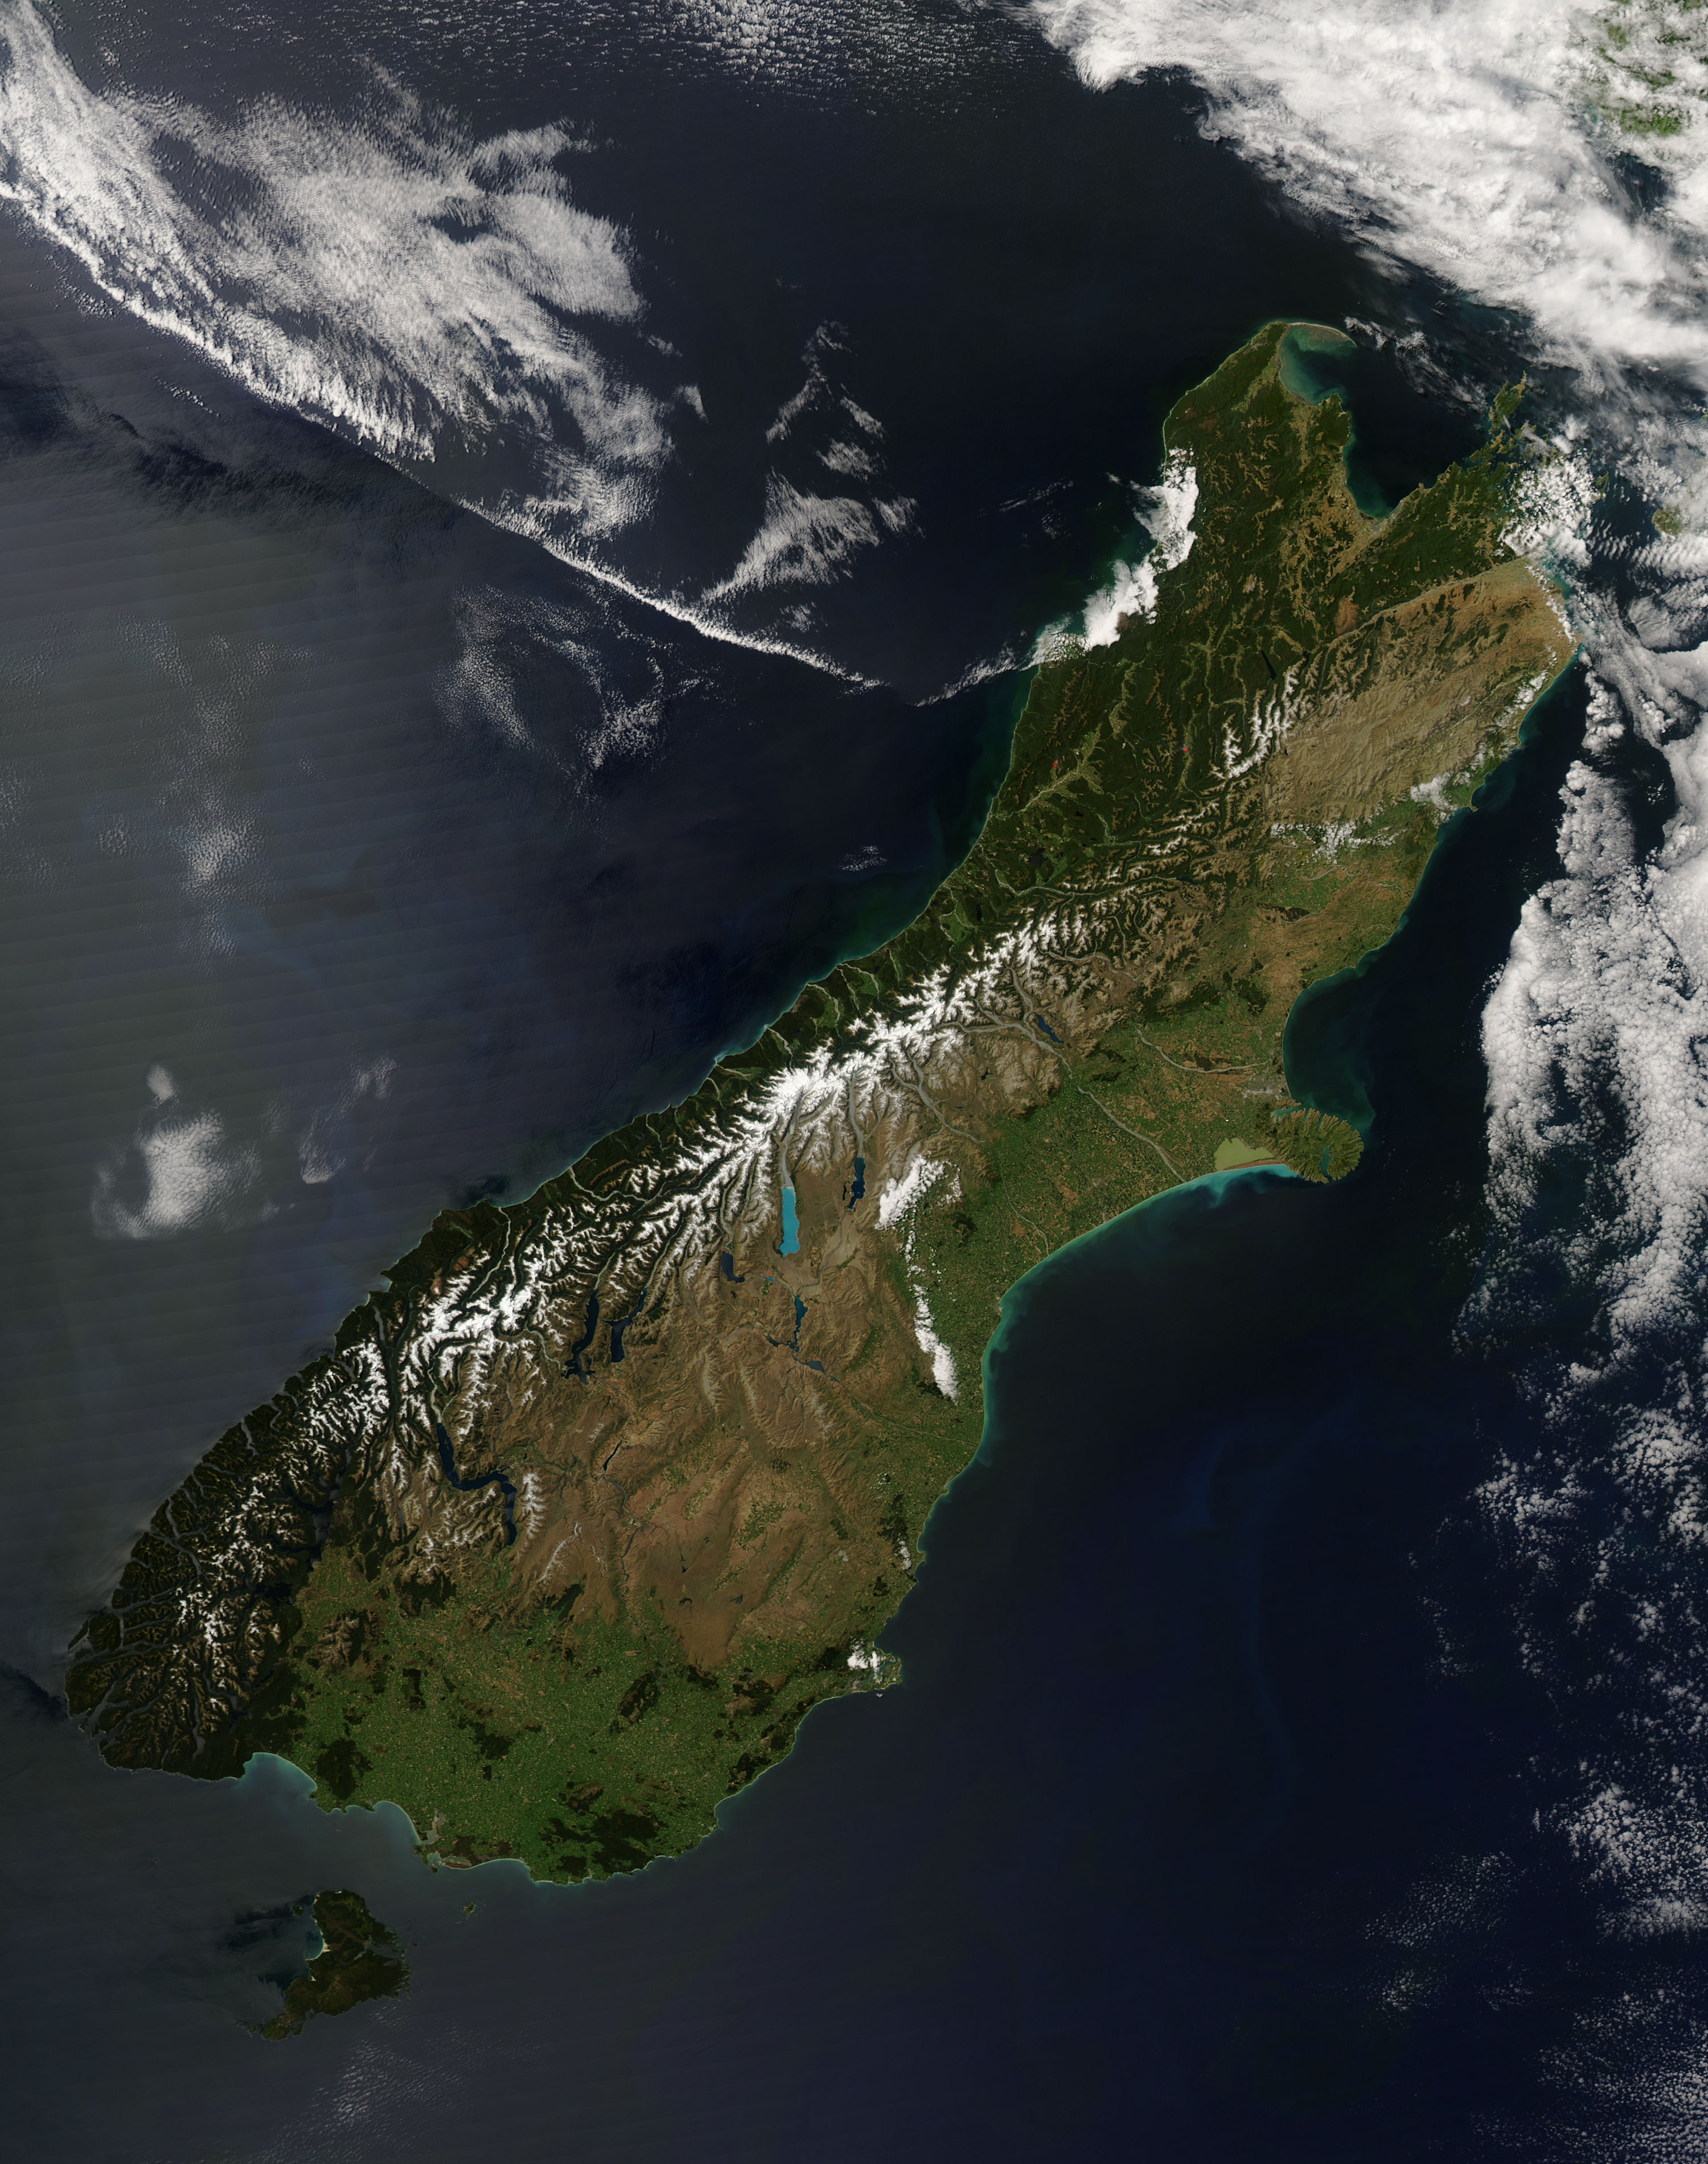 southern alps new zealand map